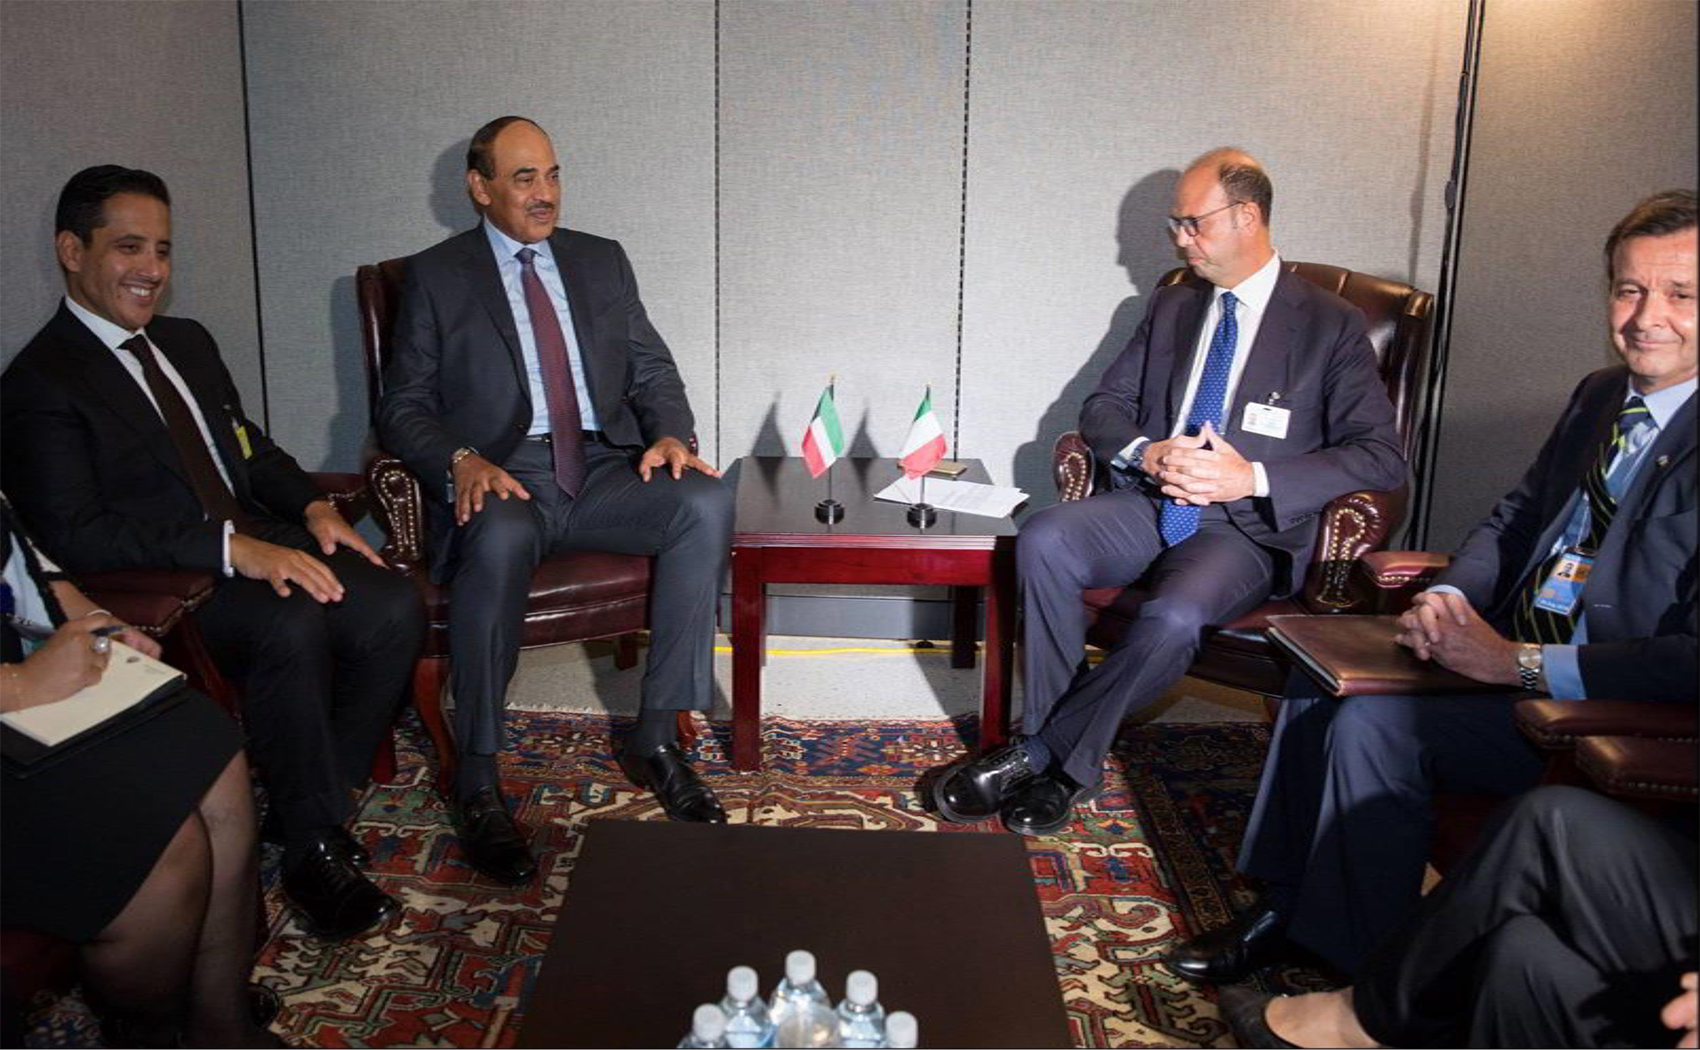 Kuwait's First Deputy Premier and Foreign Minister Sheikh Sabah Khaled Al-Hamad Al-Sabah meets with Italian Foreign Minister Angelino Alfano